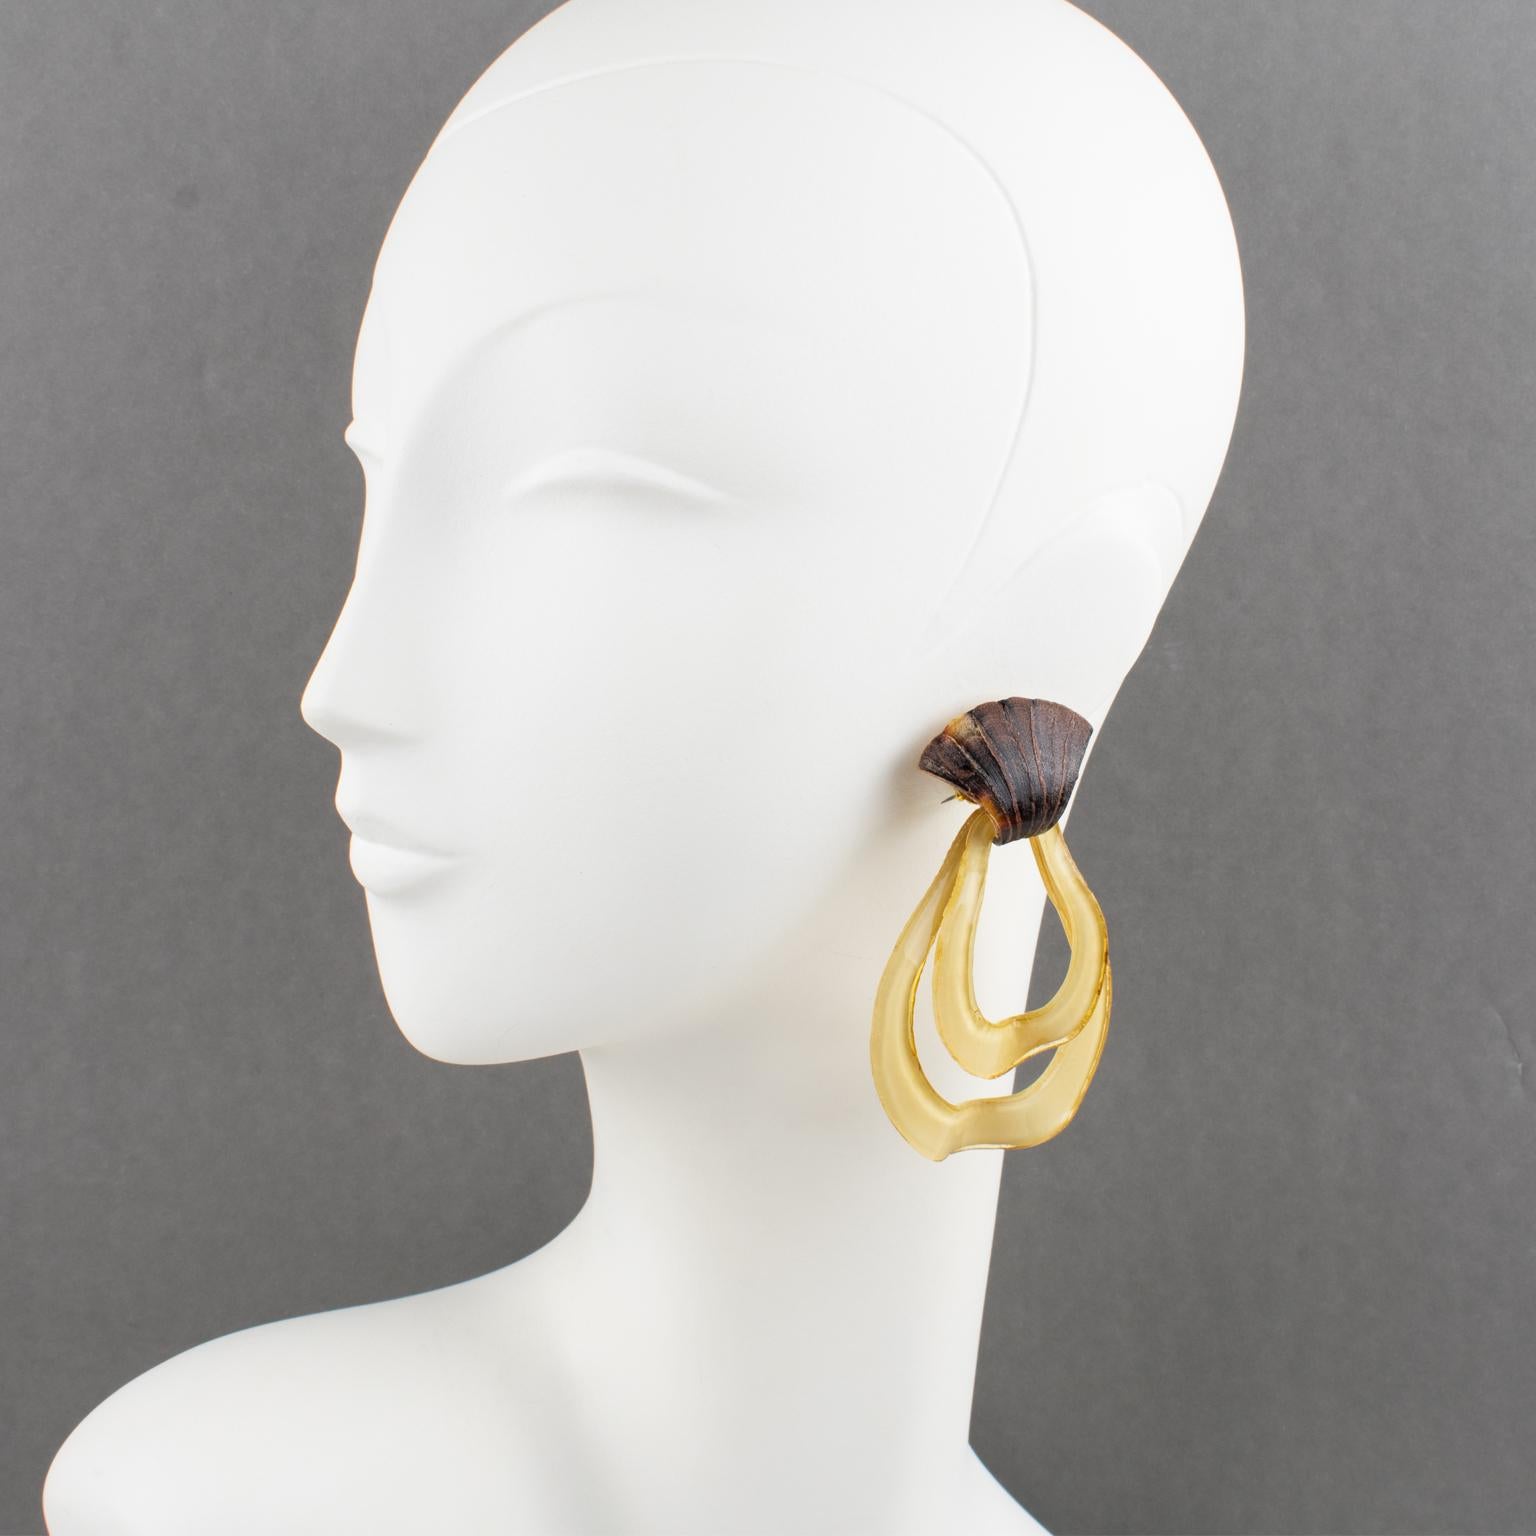 Cilea Paris designed these cute clip-on earrings for French designer Francoise Montague. The pieces boast a massive dangle shape in tan beige colored resin in graduated pear-shaped drops with tortoise resin triangle fastenings. The assorted carved